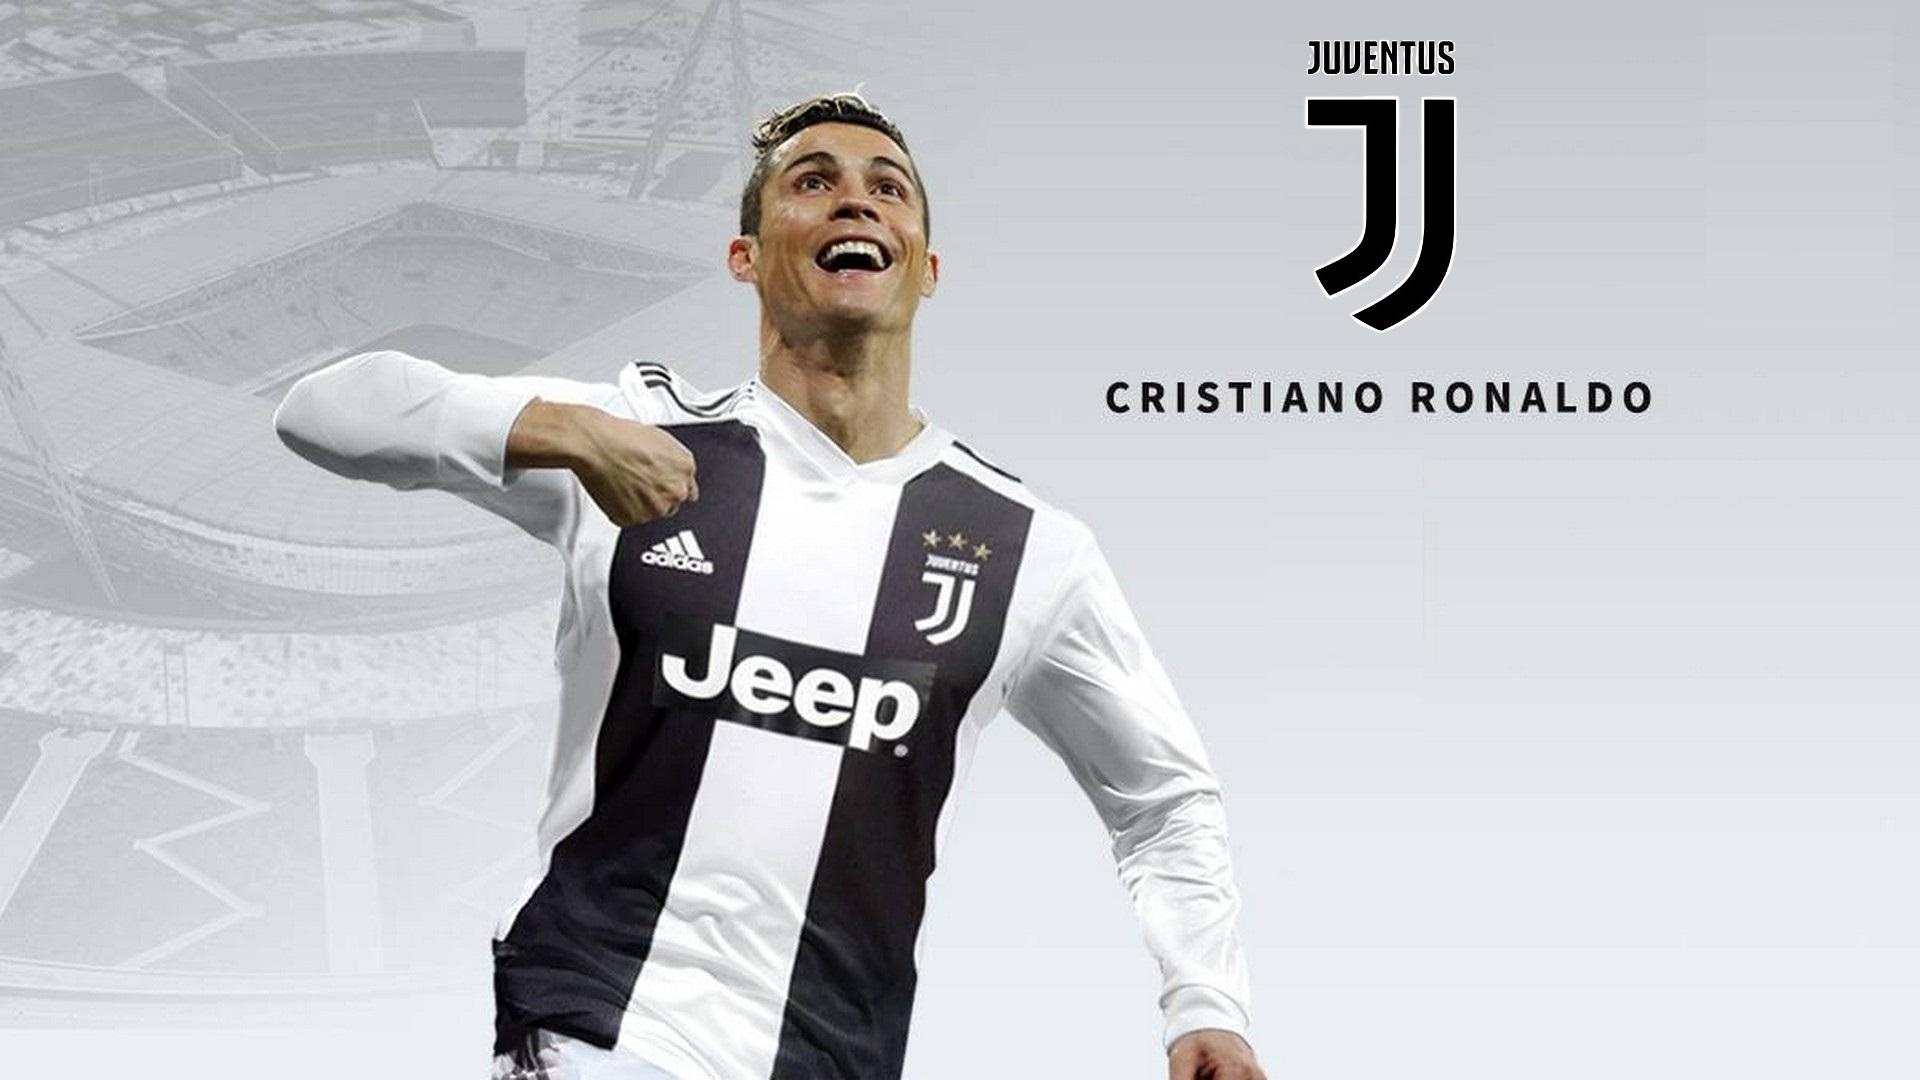 Juventus: The Portuguese superstar, holds the records for most appearances (183), goals (140), in the Champions League. 1920x1080 Full HD Wallpaper.